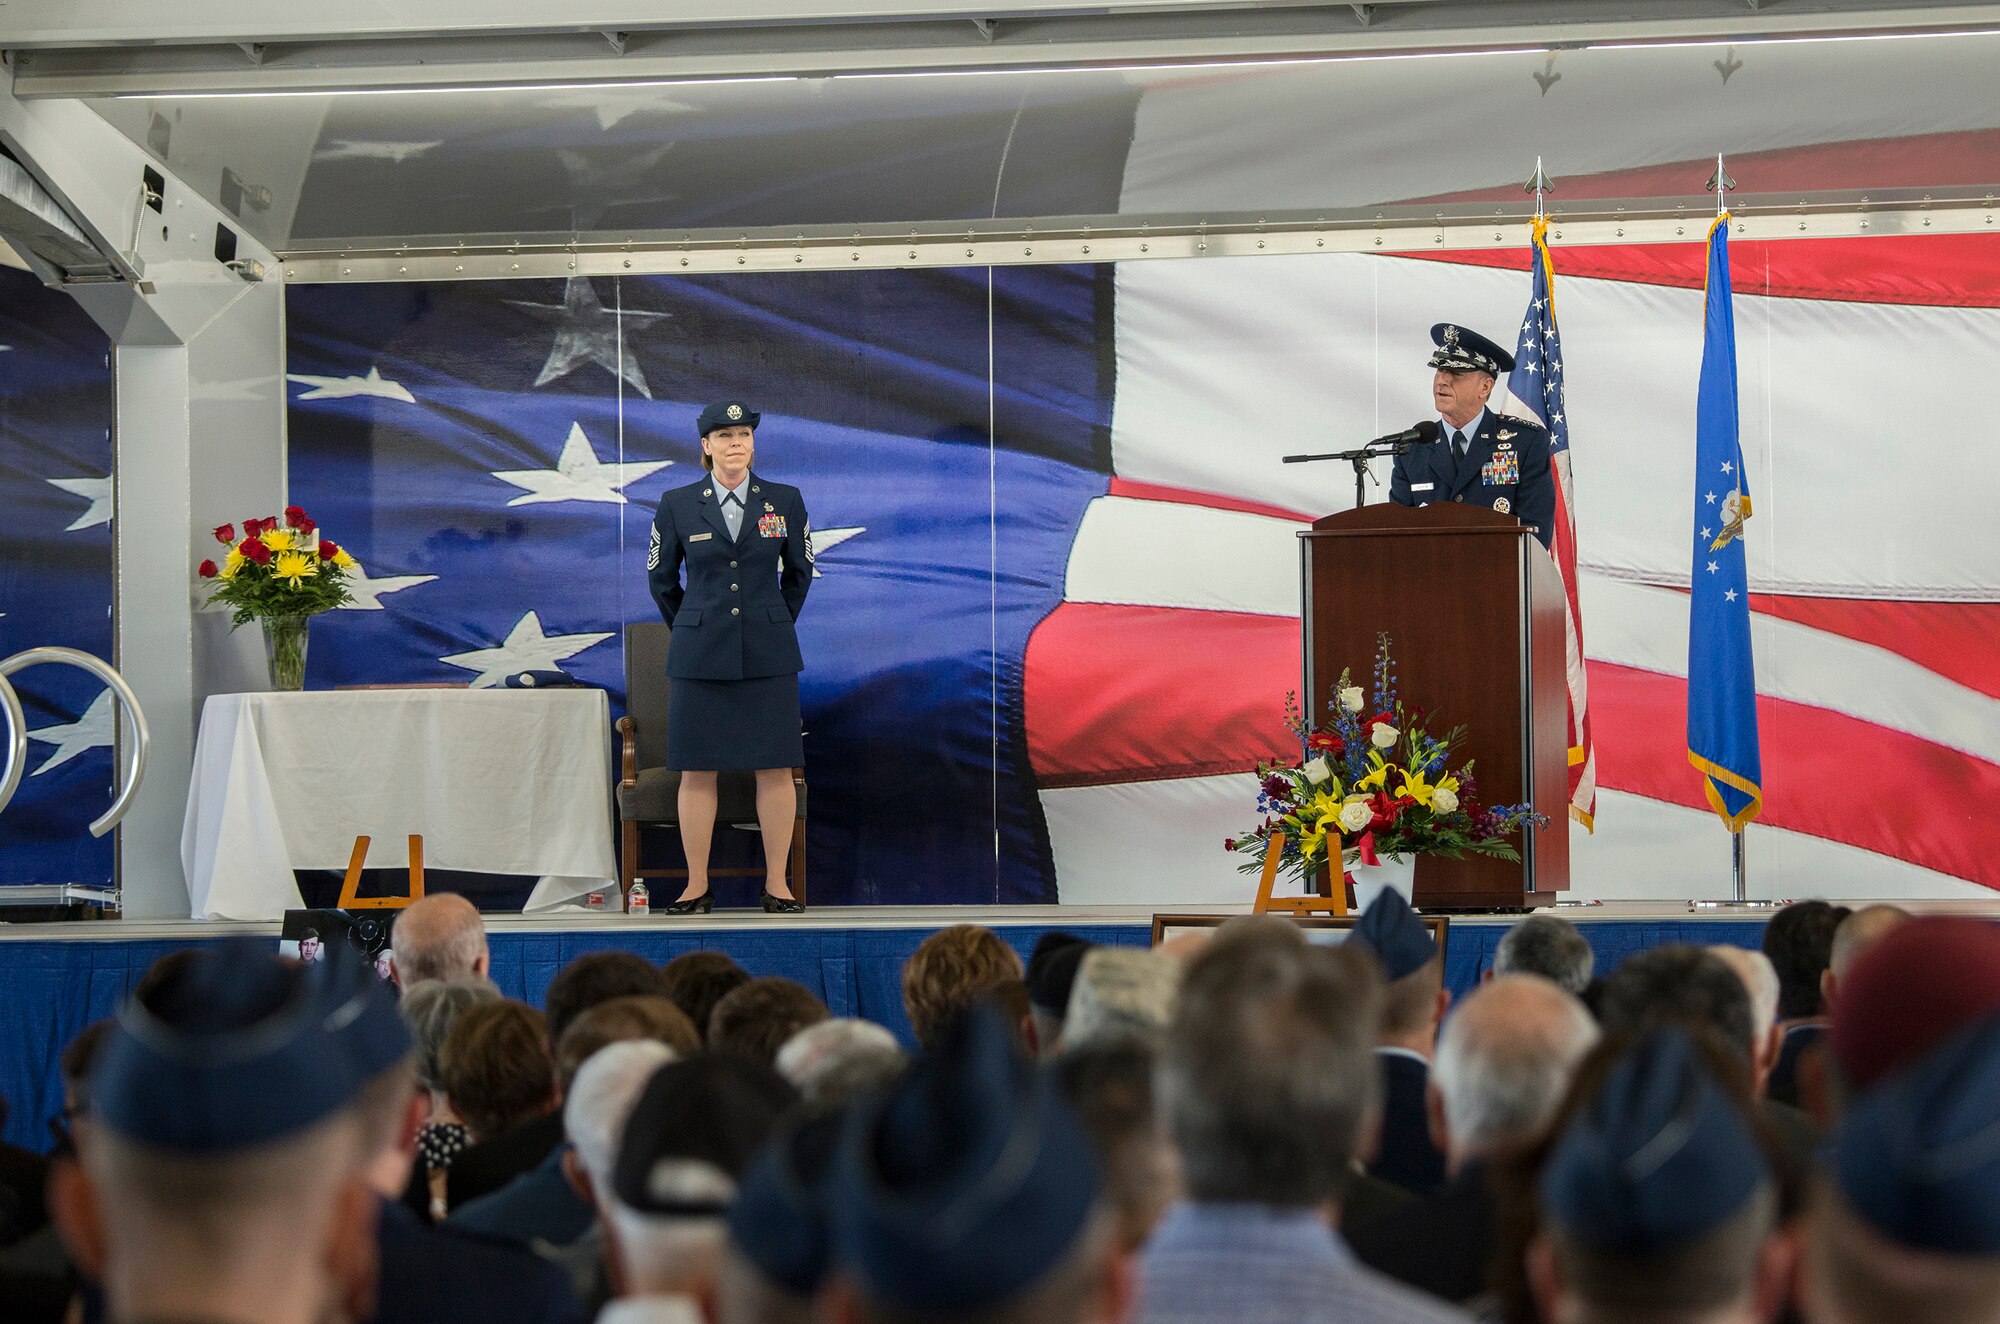 U.S. Air Force Chief of Staff Gen. David L. Goldfein addresses the family of retired U.S. Air Force Lt. Col. Richard “Dick” E. Cole during a memorial service at Joint Base San Antonio-Randolph, Texas April 18, 2019.